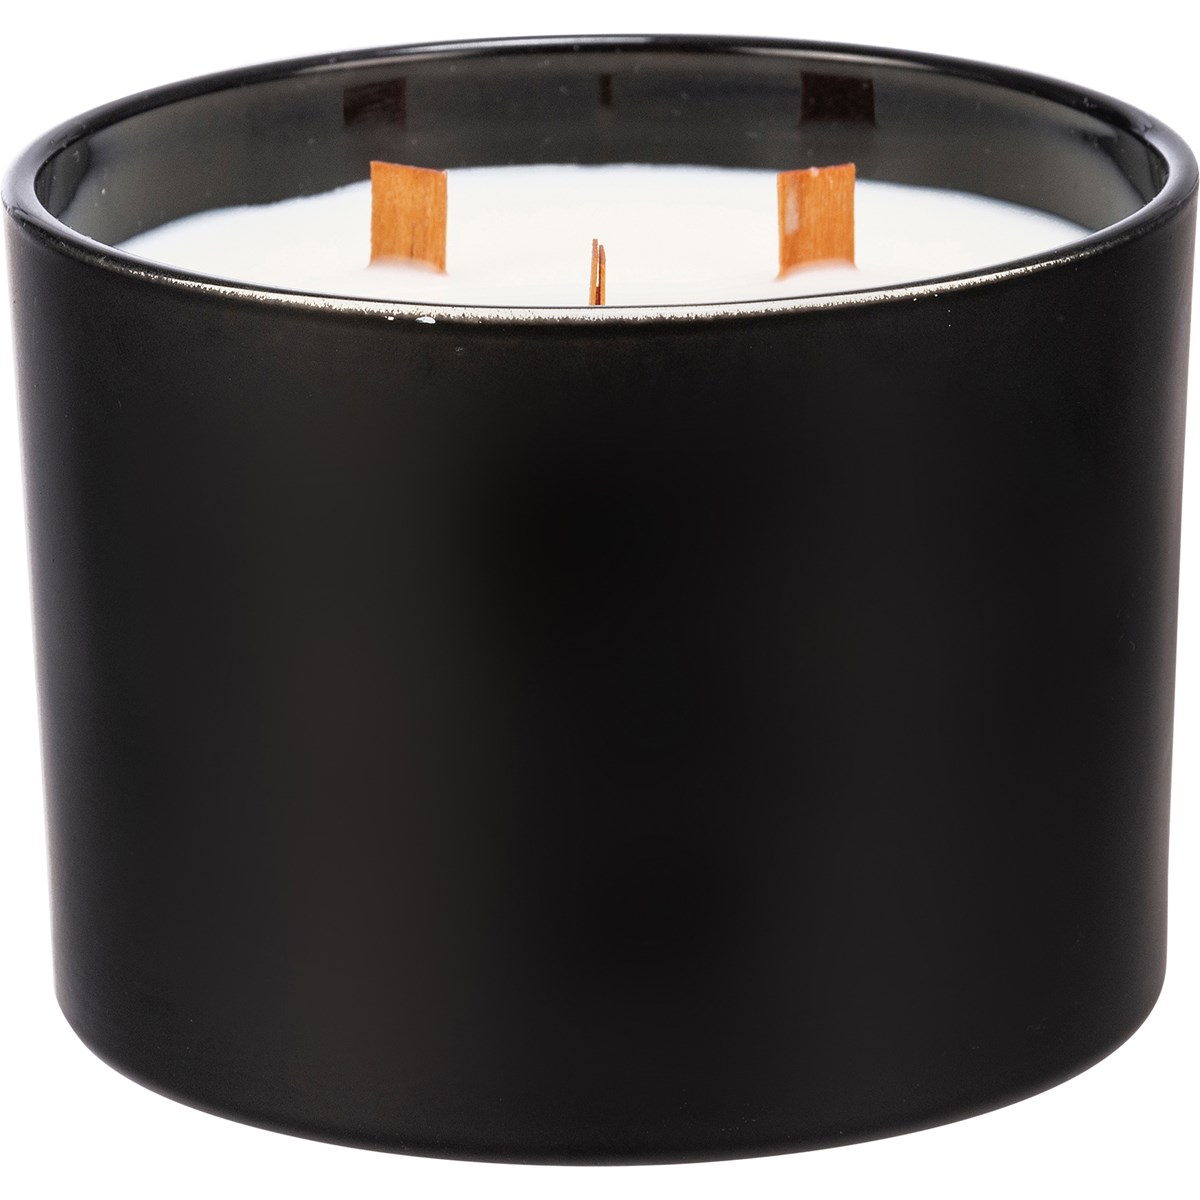 Kindness Candle - Soy Wax, Glass, Wood